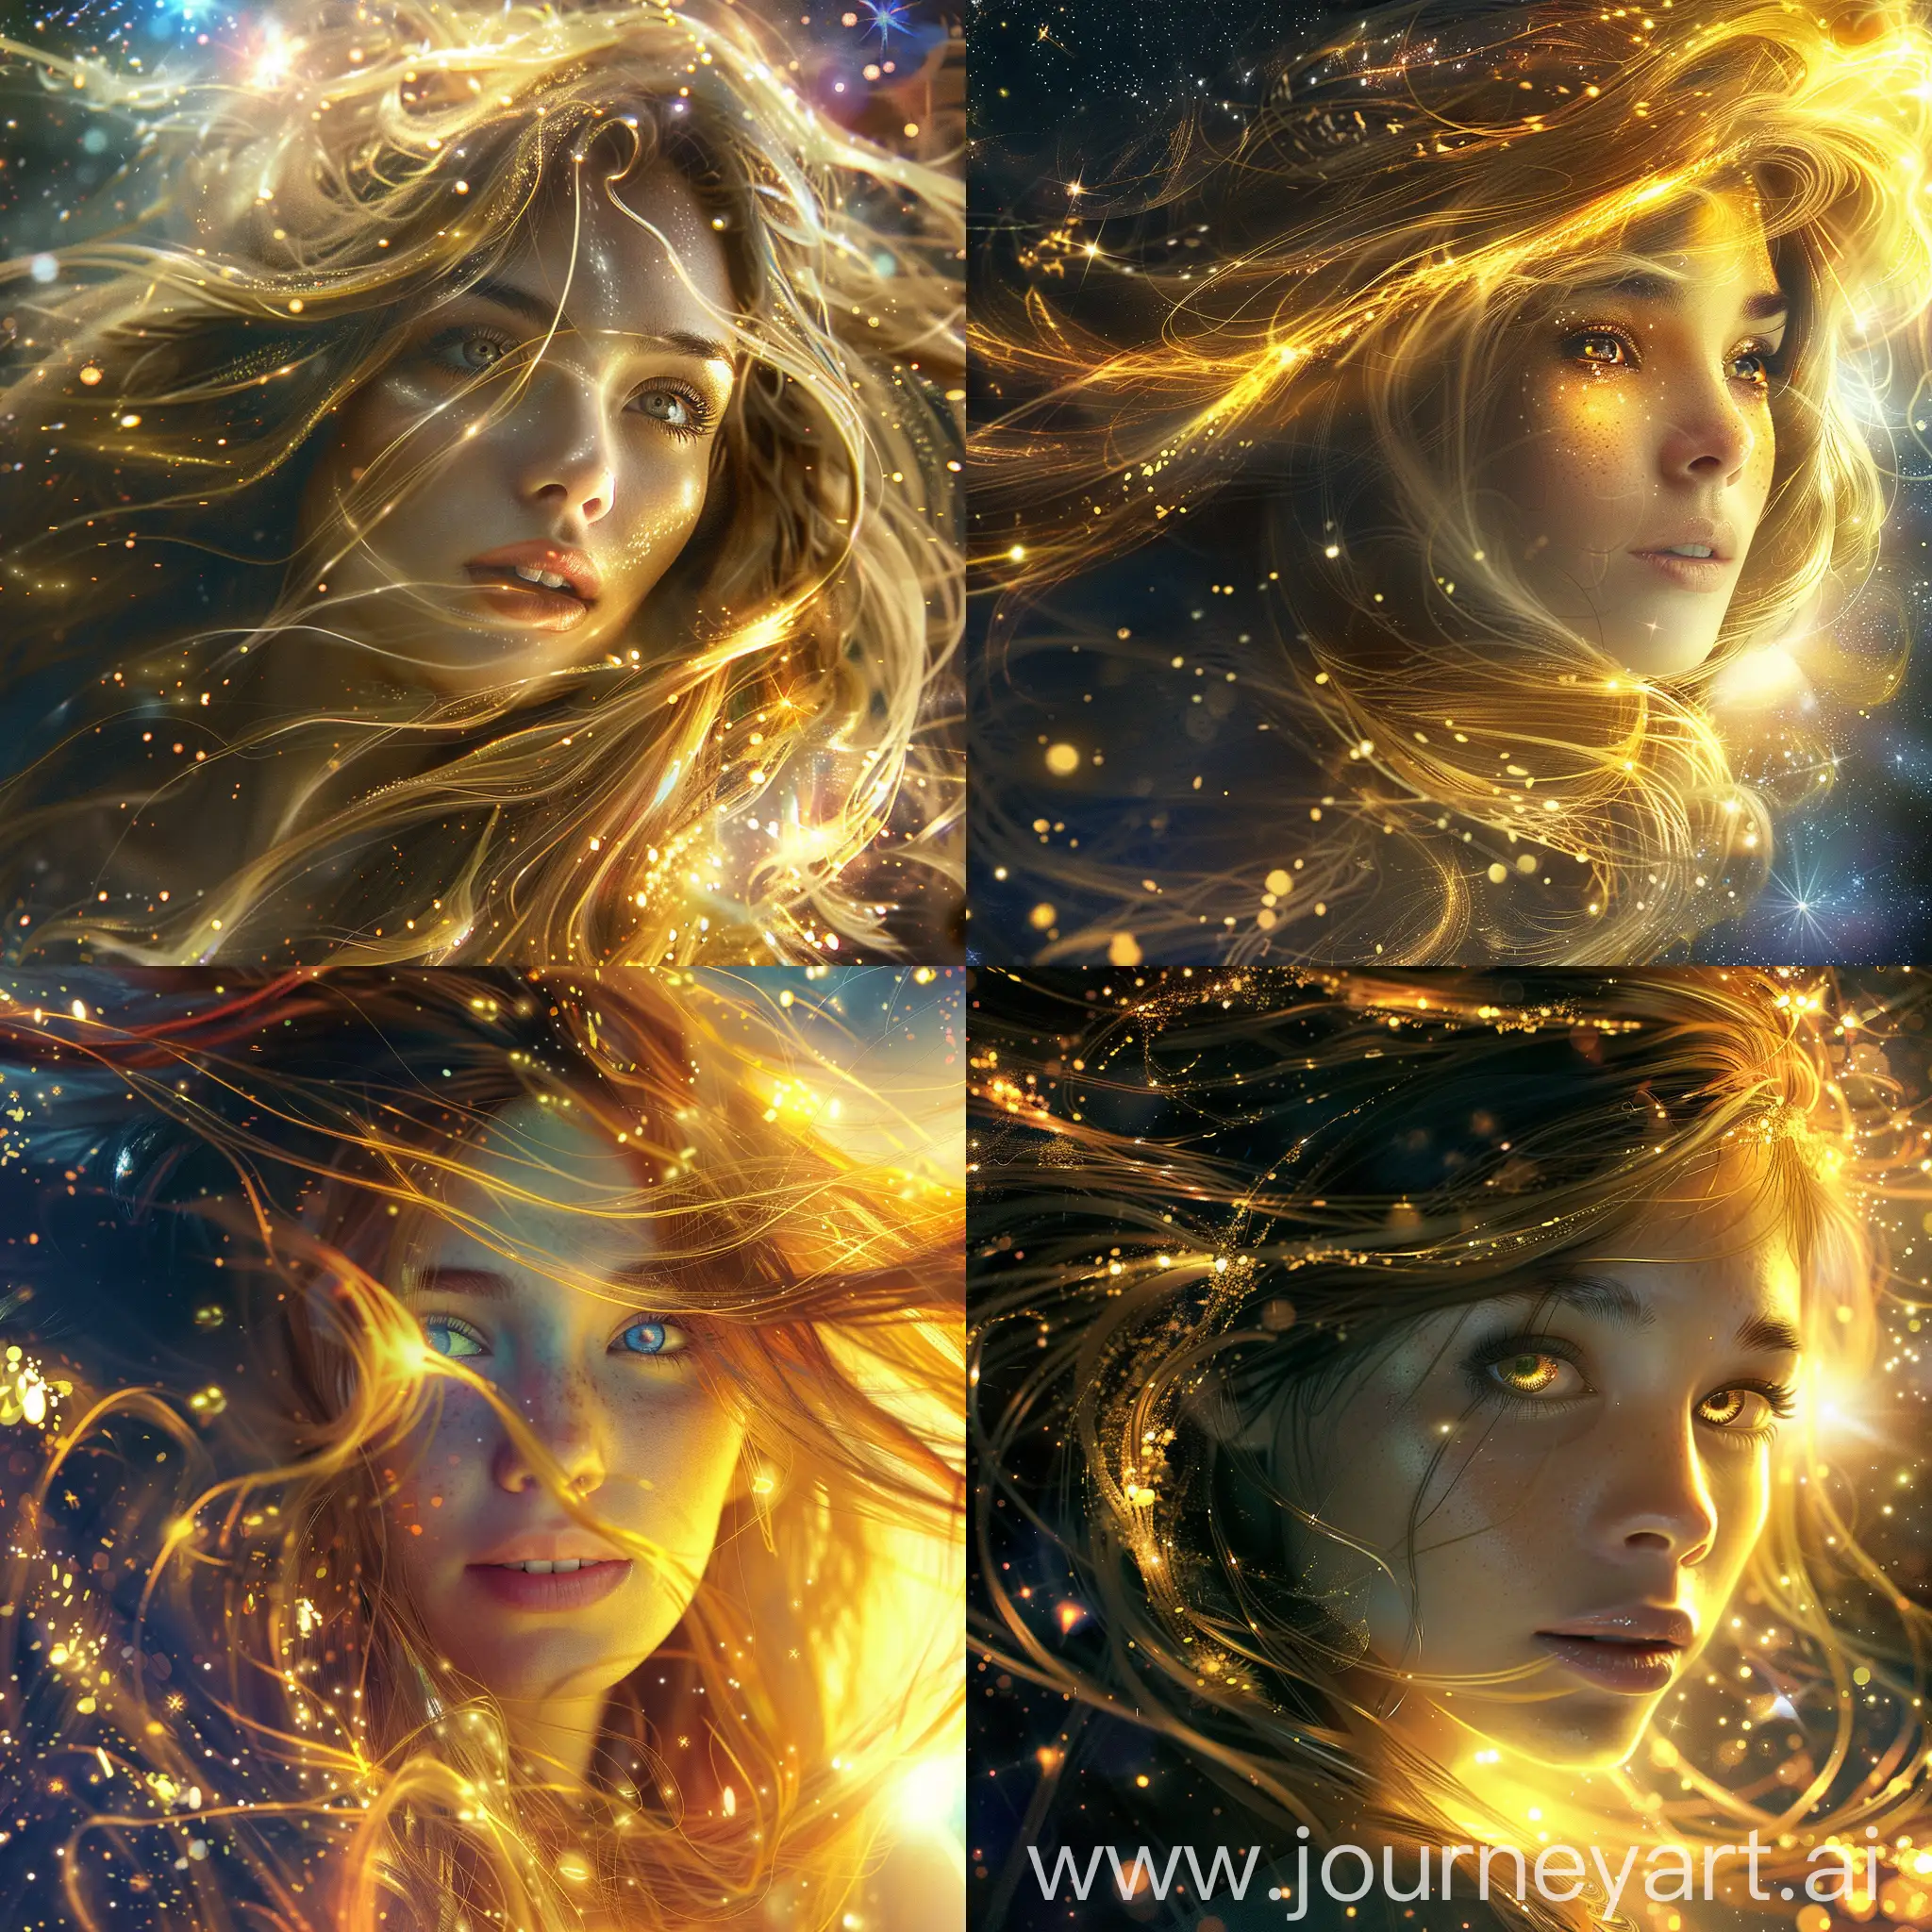 A beautiful otherworldly woman with beautiful eyes and long hair that looks that look like the light of the sun. Her hair is shining gold and sparkling like the sun. The background is outer space 